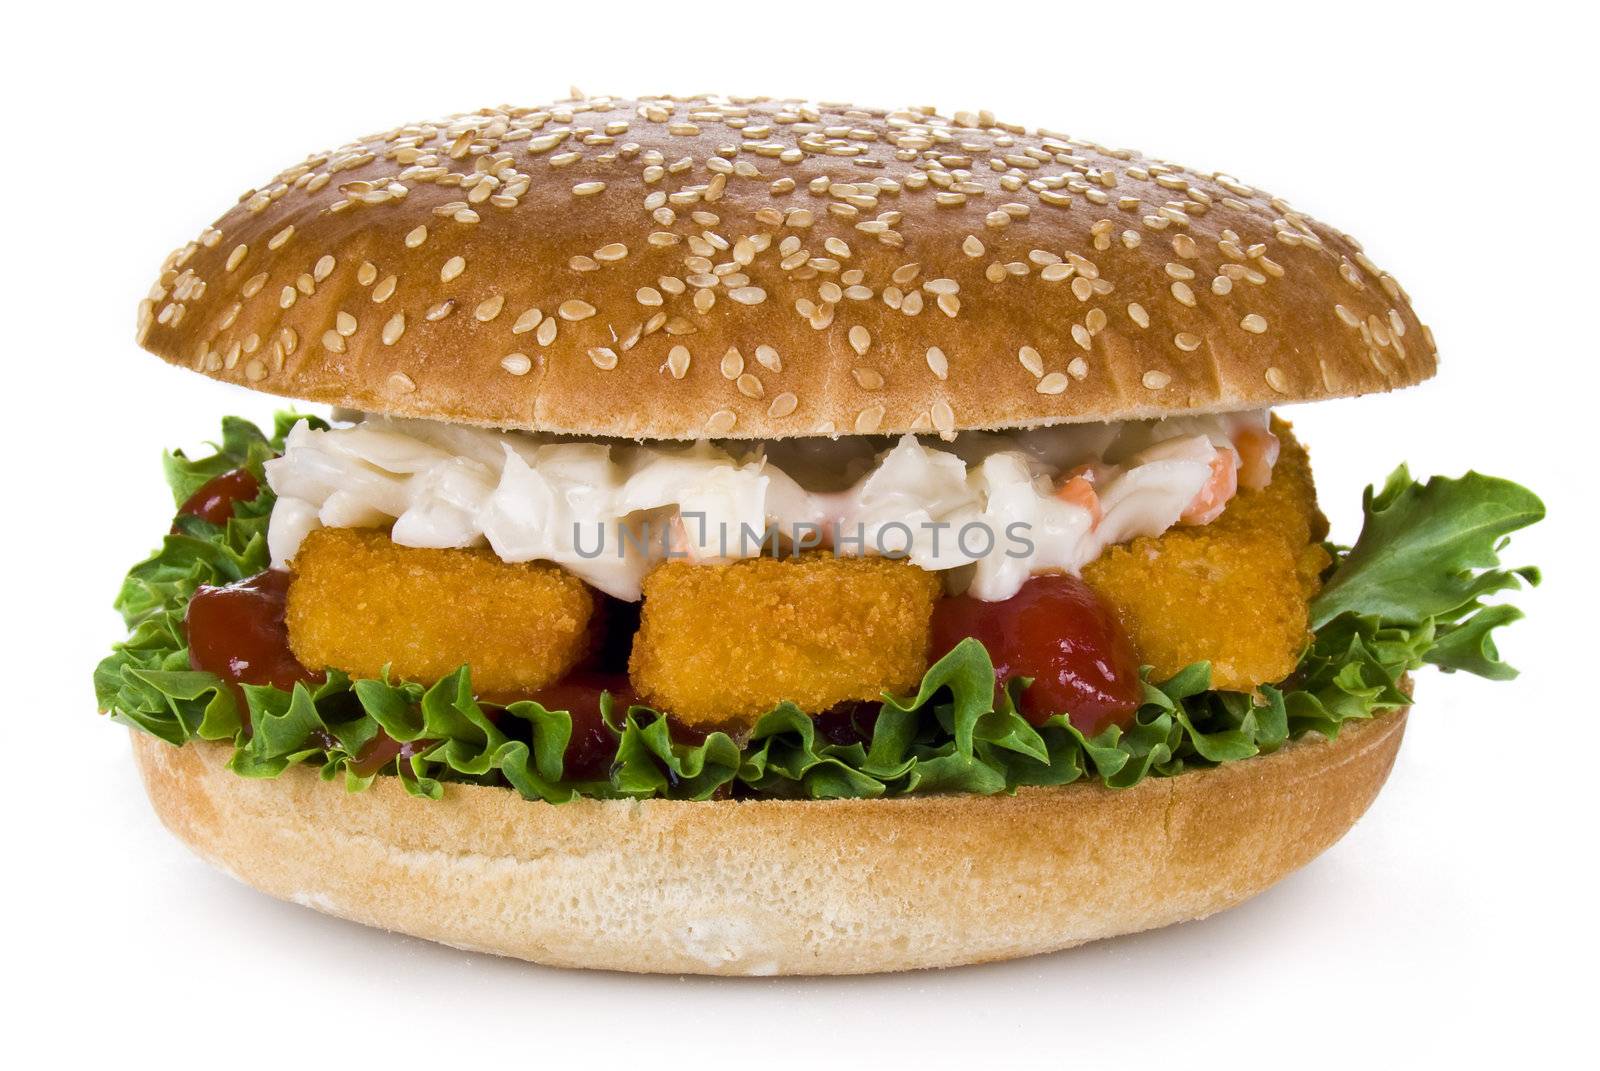 Burger with fish fingers and coleslaw salad - isolated